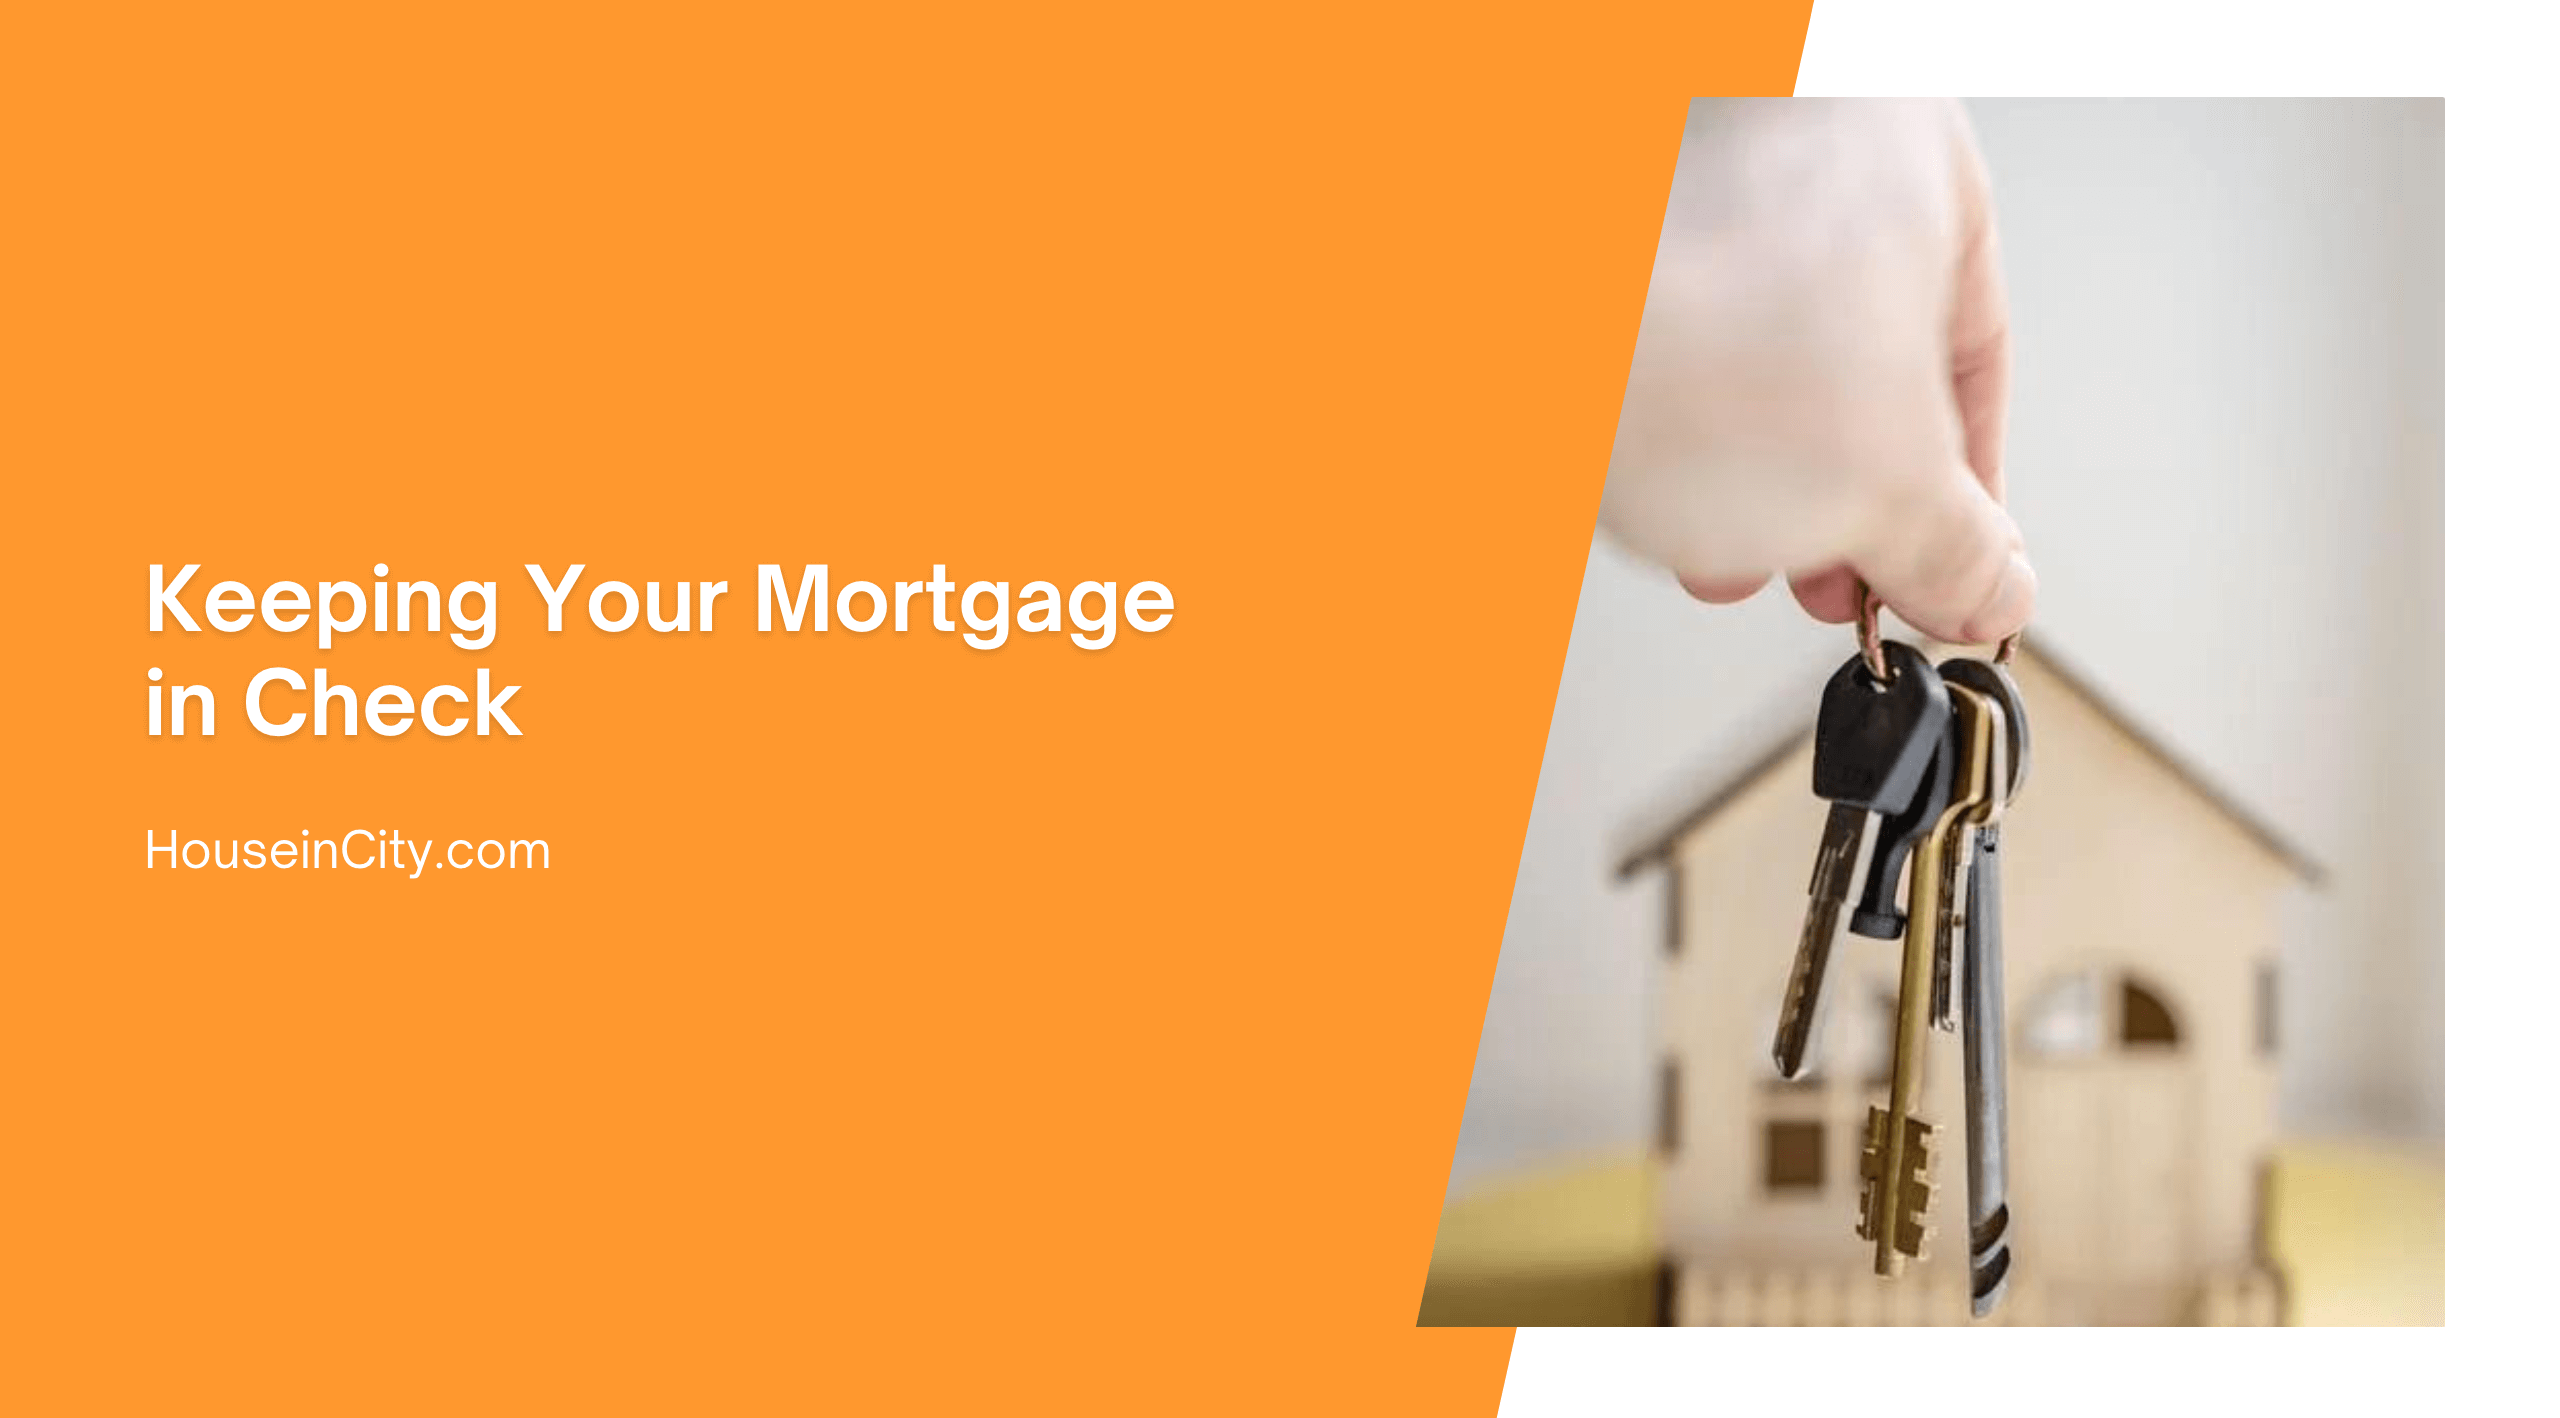 Keeping Your Mortgage in Check